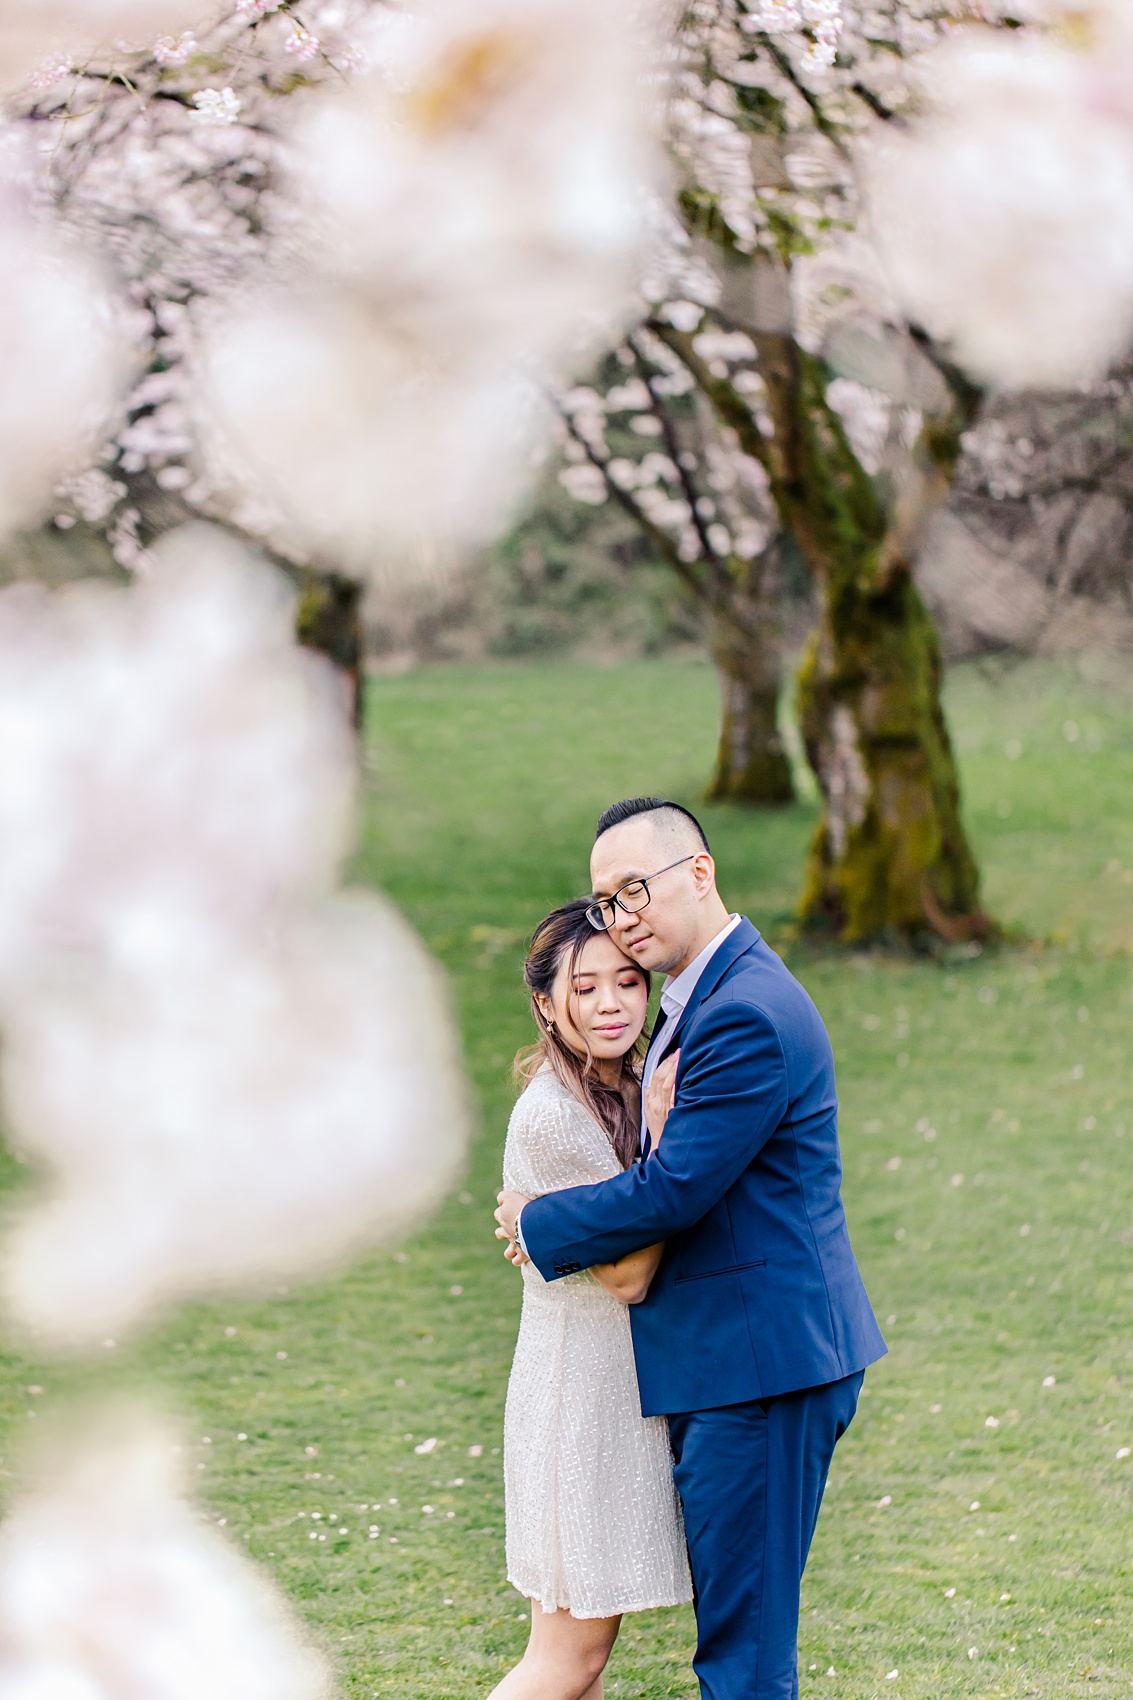 Stanley Park Cherry Blossoms engagement photo in Vancouver, BC, bride and groom embracing under the cherry blossoms